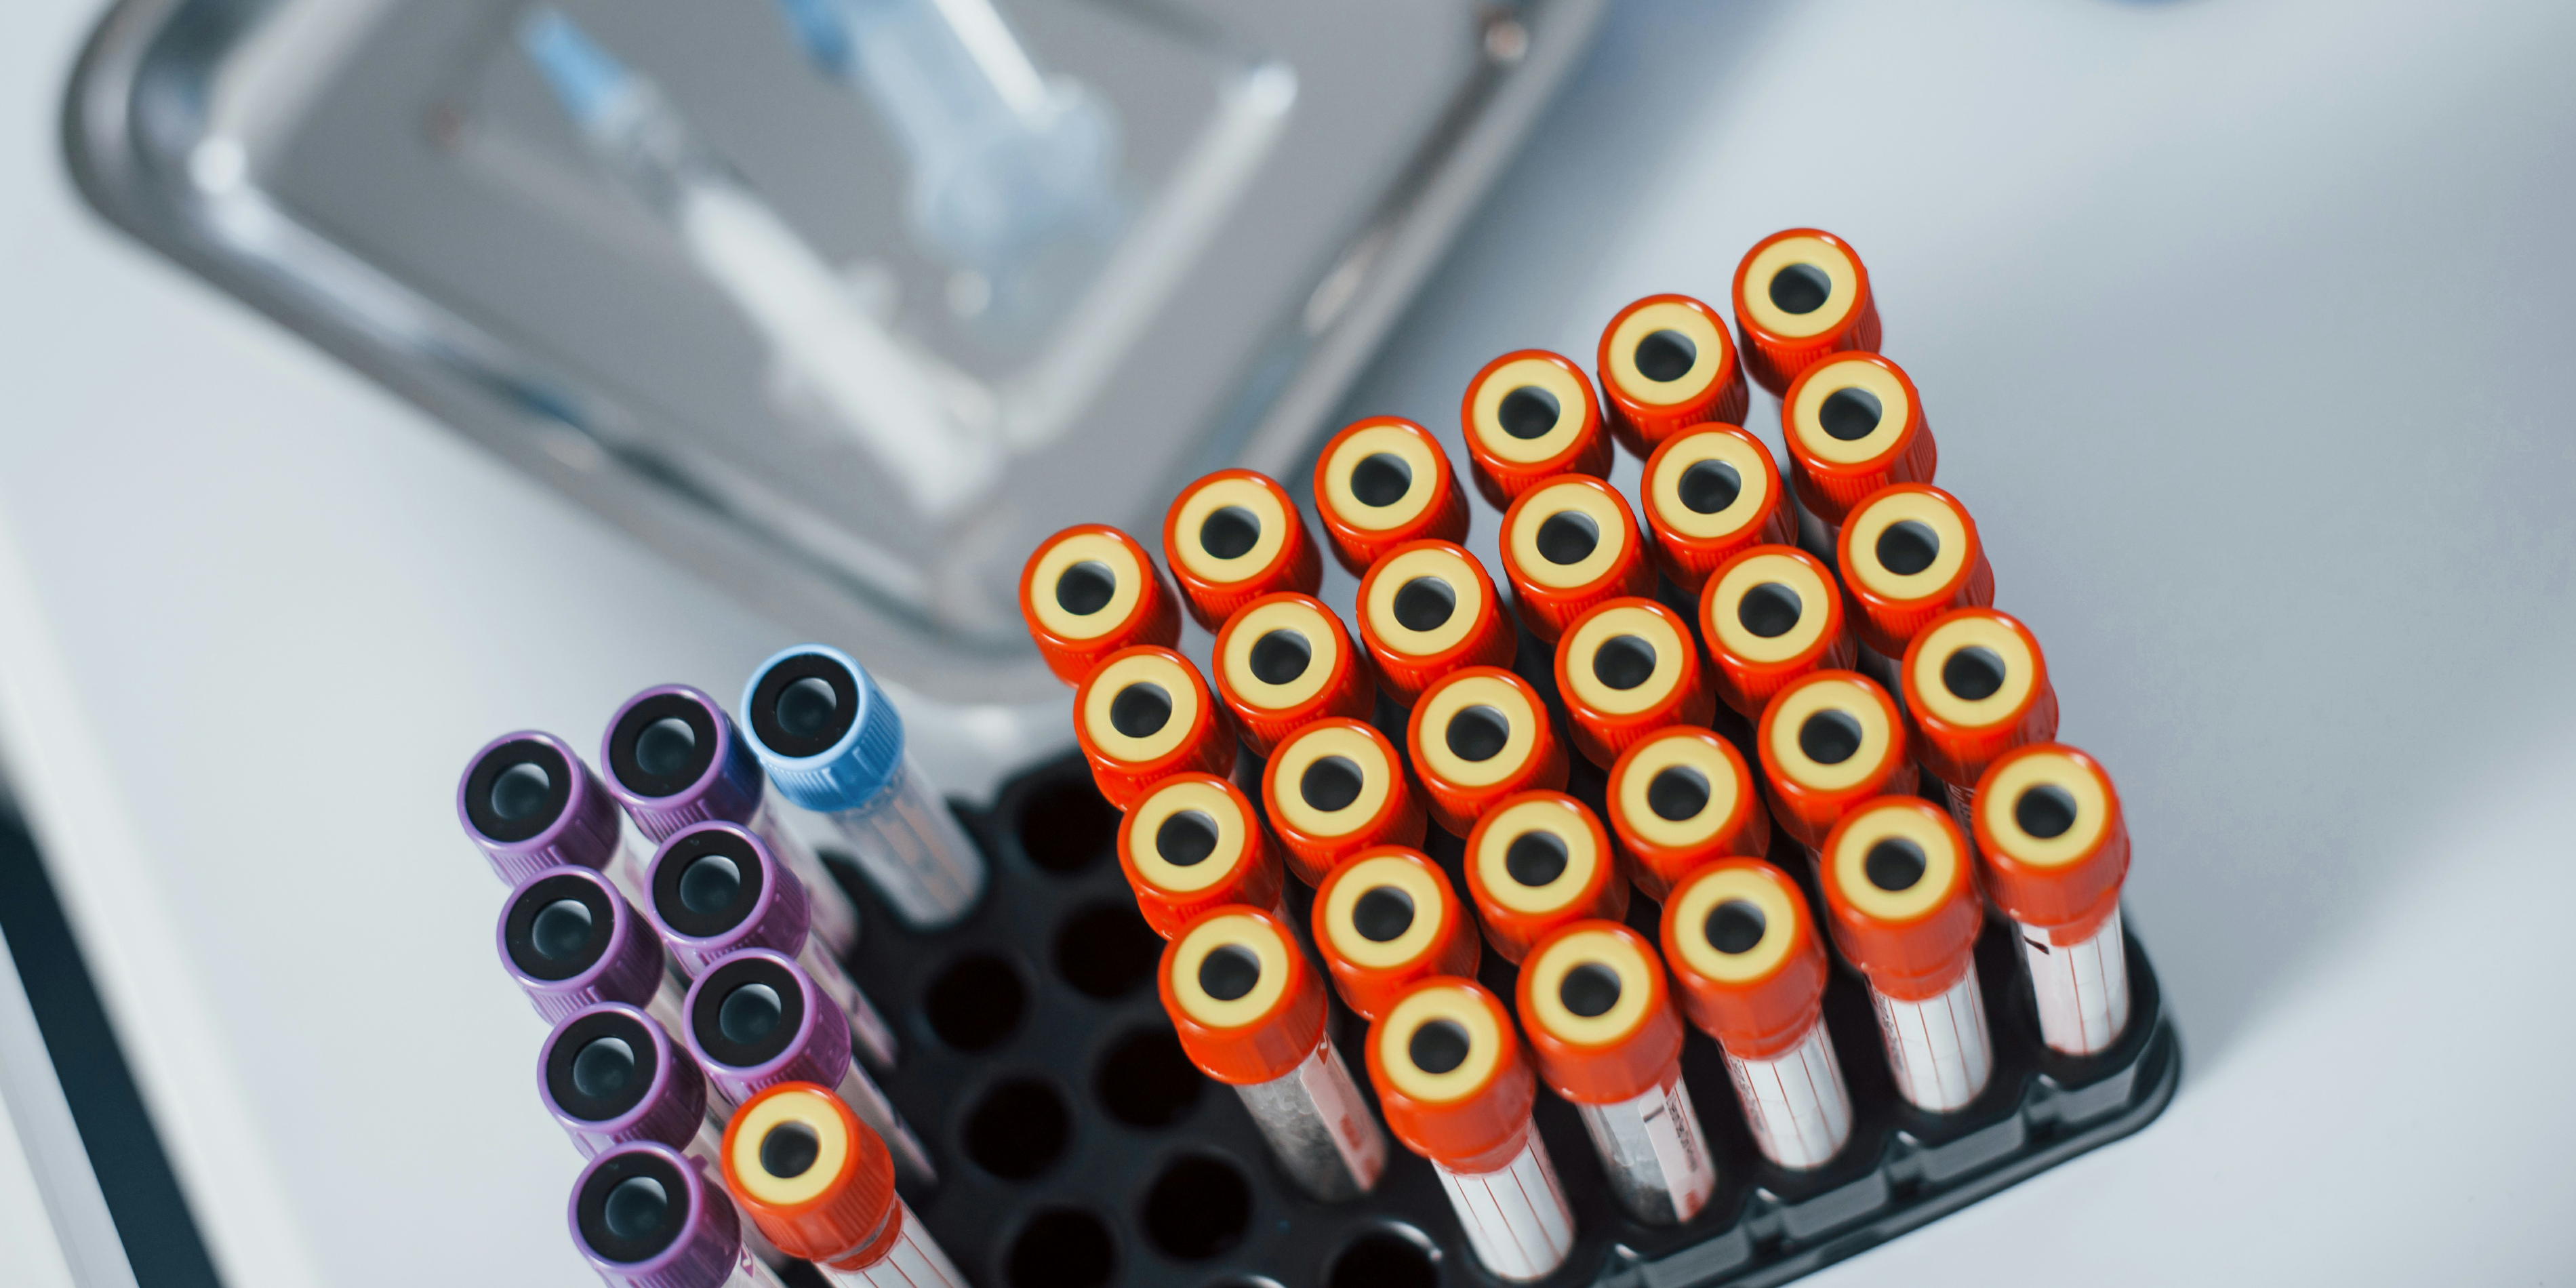 Liquid Biopsies: A Game-Changer for Outreach to Healthcare Providers